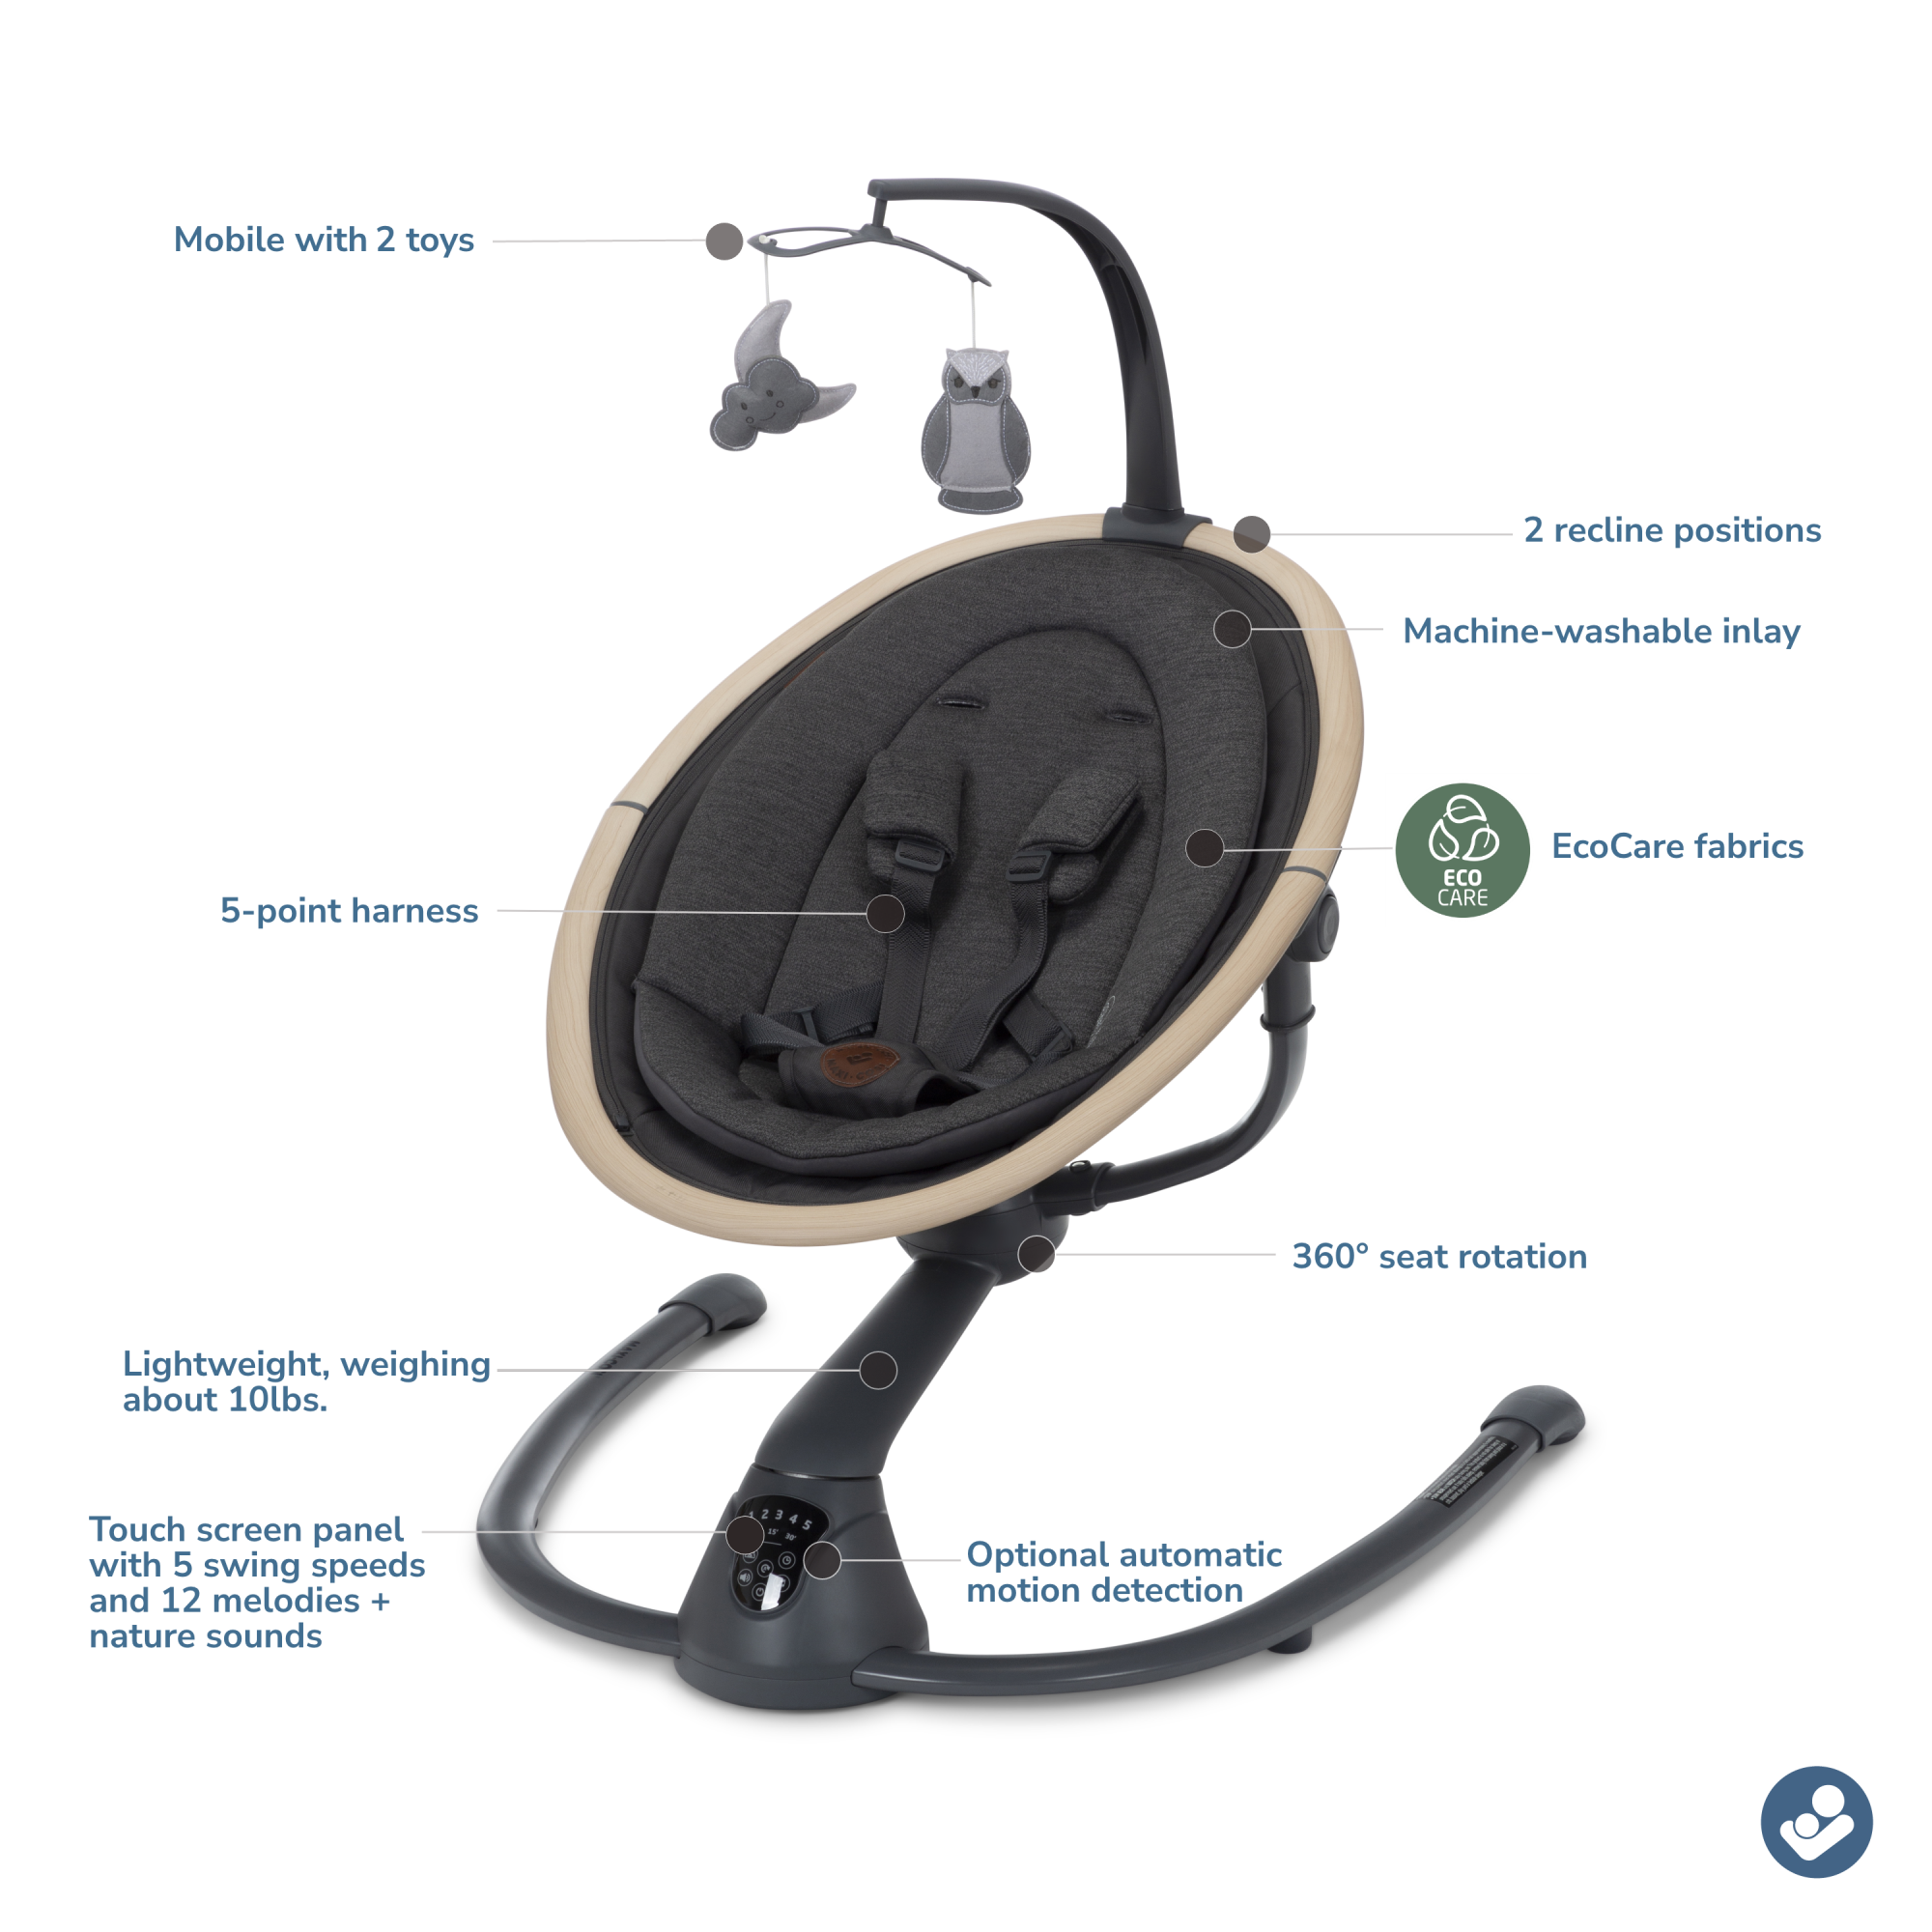 Cassia Swing - Classic Graphite - infographic: mobile with 2 toys, 2 recline positions, machine-washable inlay, EcoCare fabrics, 5-point harness, lightweight, weighing about 10 lbs., 360 degree seat rotation, touch screen panel with 5 swing speeds and 12 melodies + nature sounds, optional automatic motion detection